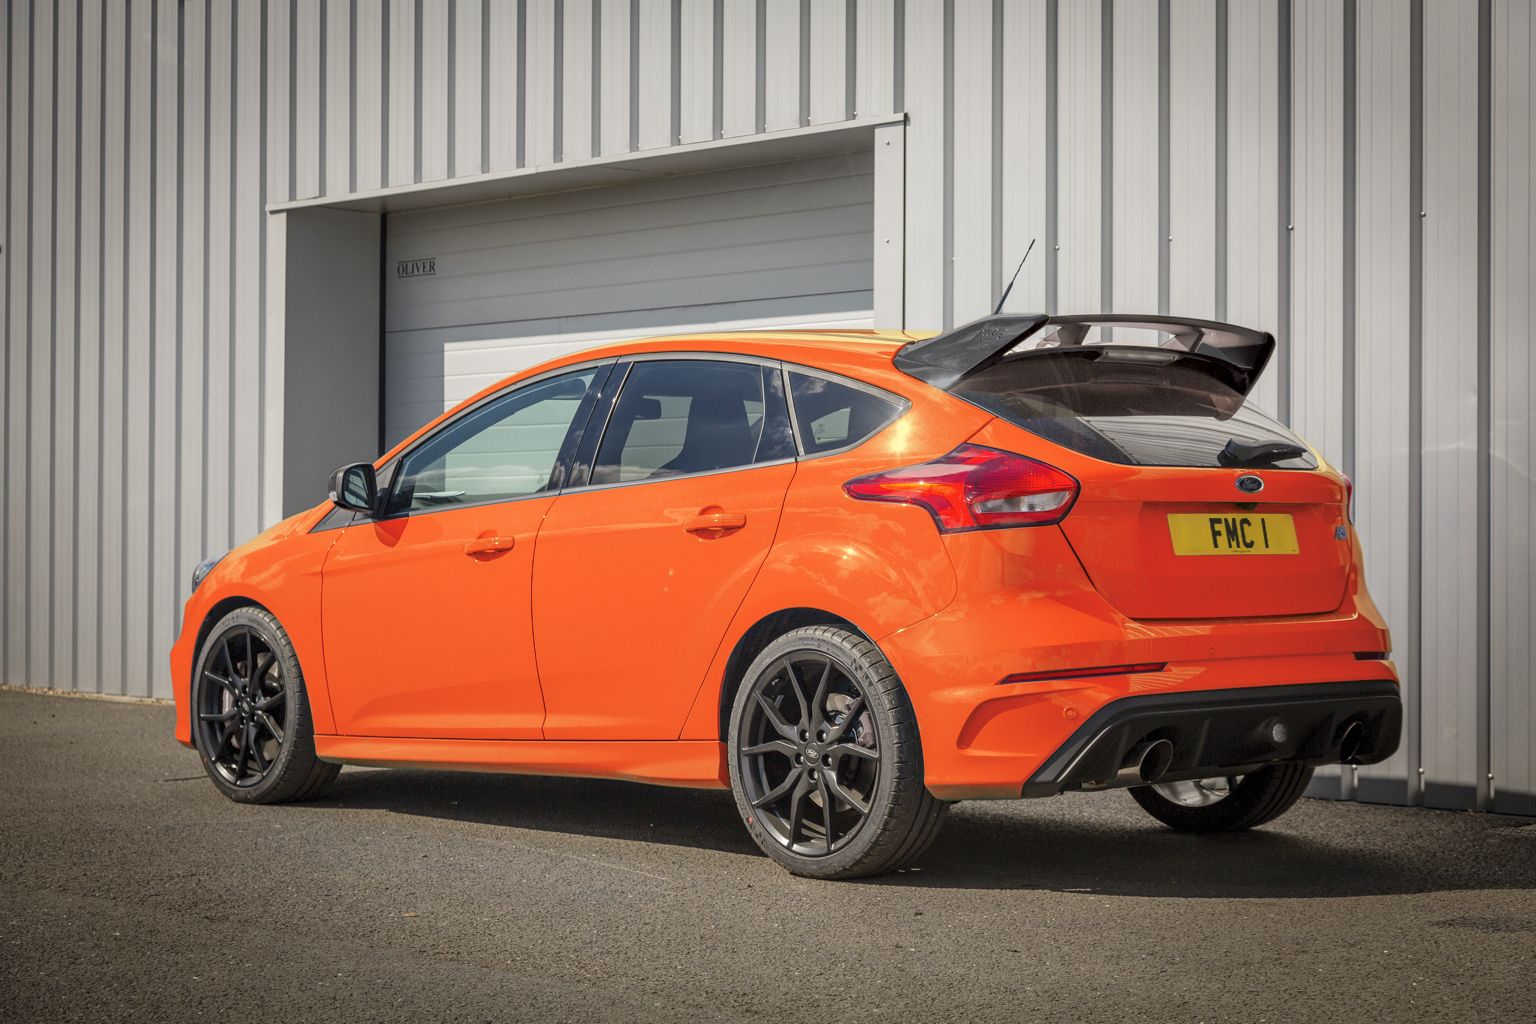 2018 The Focus RS Heritage Edition is Here to Bid Farewell to the Current Generation